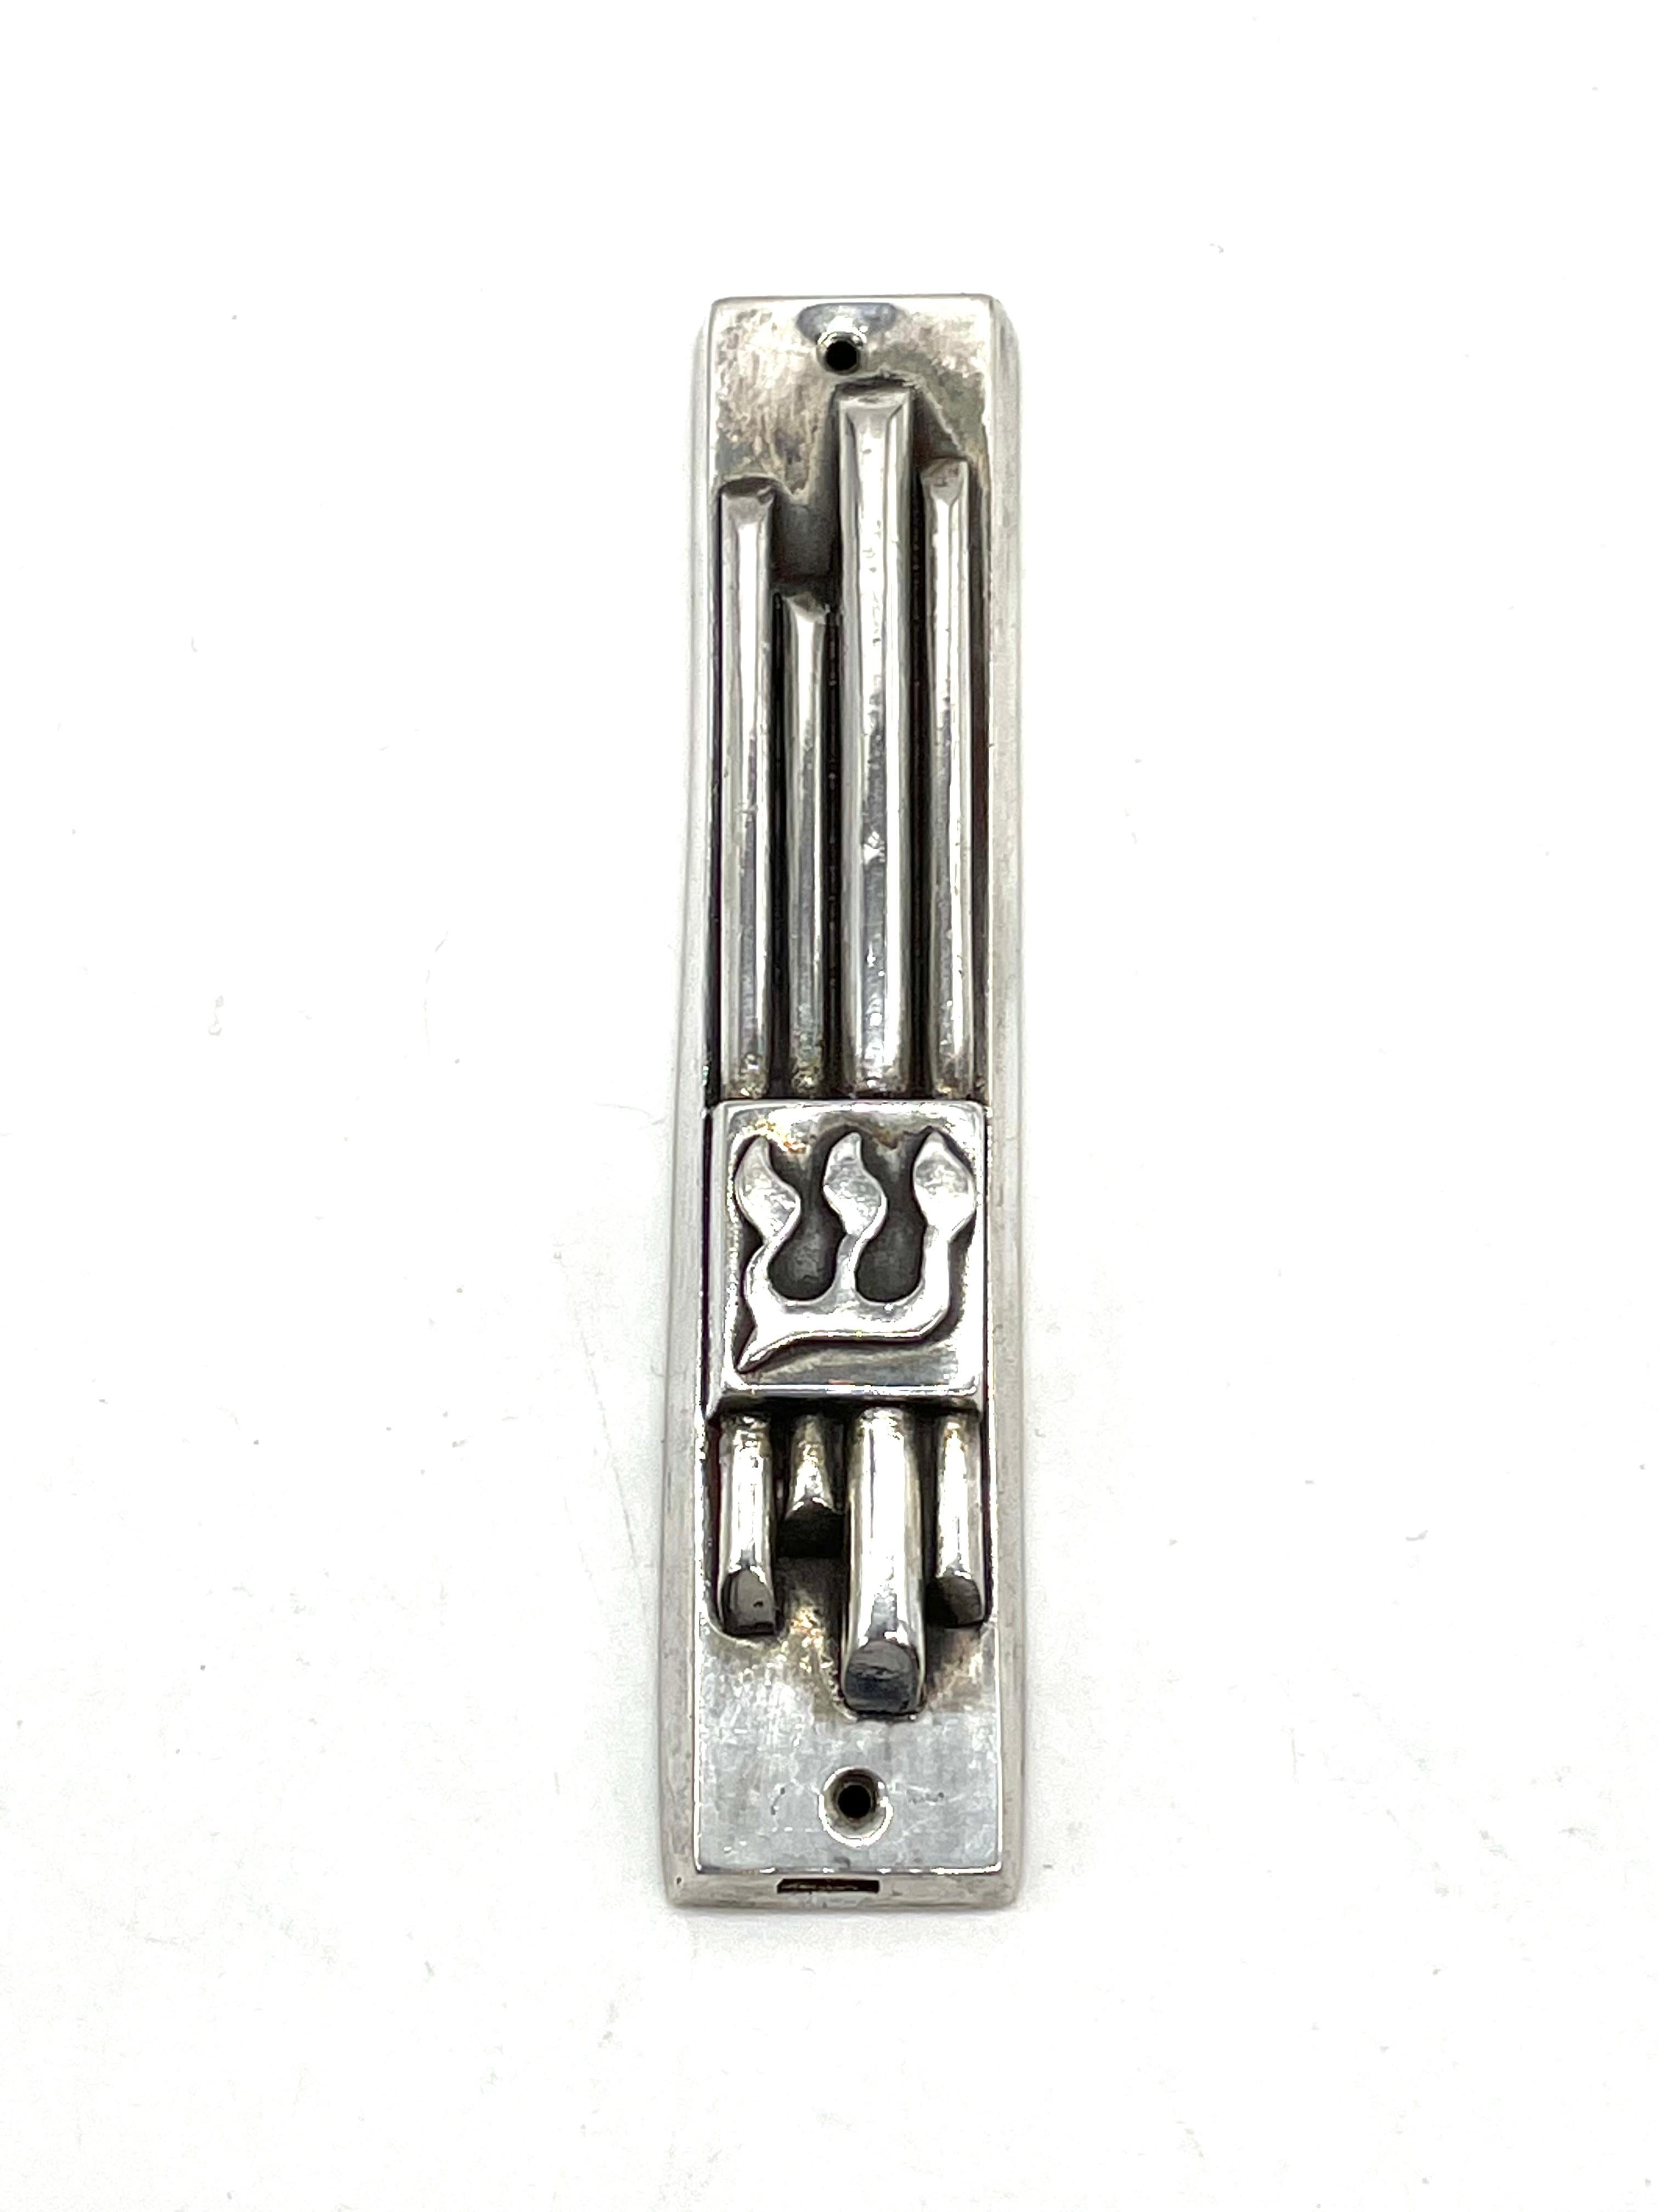 Pure silver mezuzah case by Henryk Winograd. Decorated with four vertical tubes, the Hebrew letter Shin referring to g-d appears at its bottom.

Henryk Winograd was one of the world's greatest 20th Century masters of traditional silversmithing